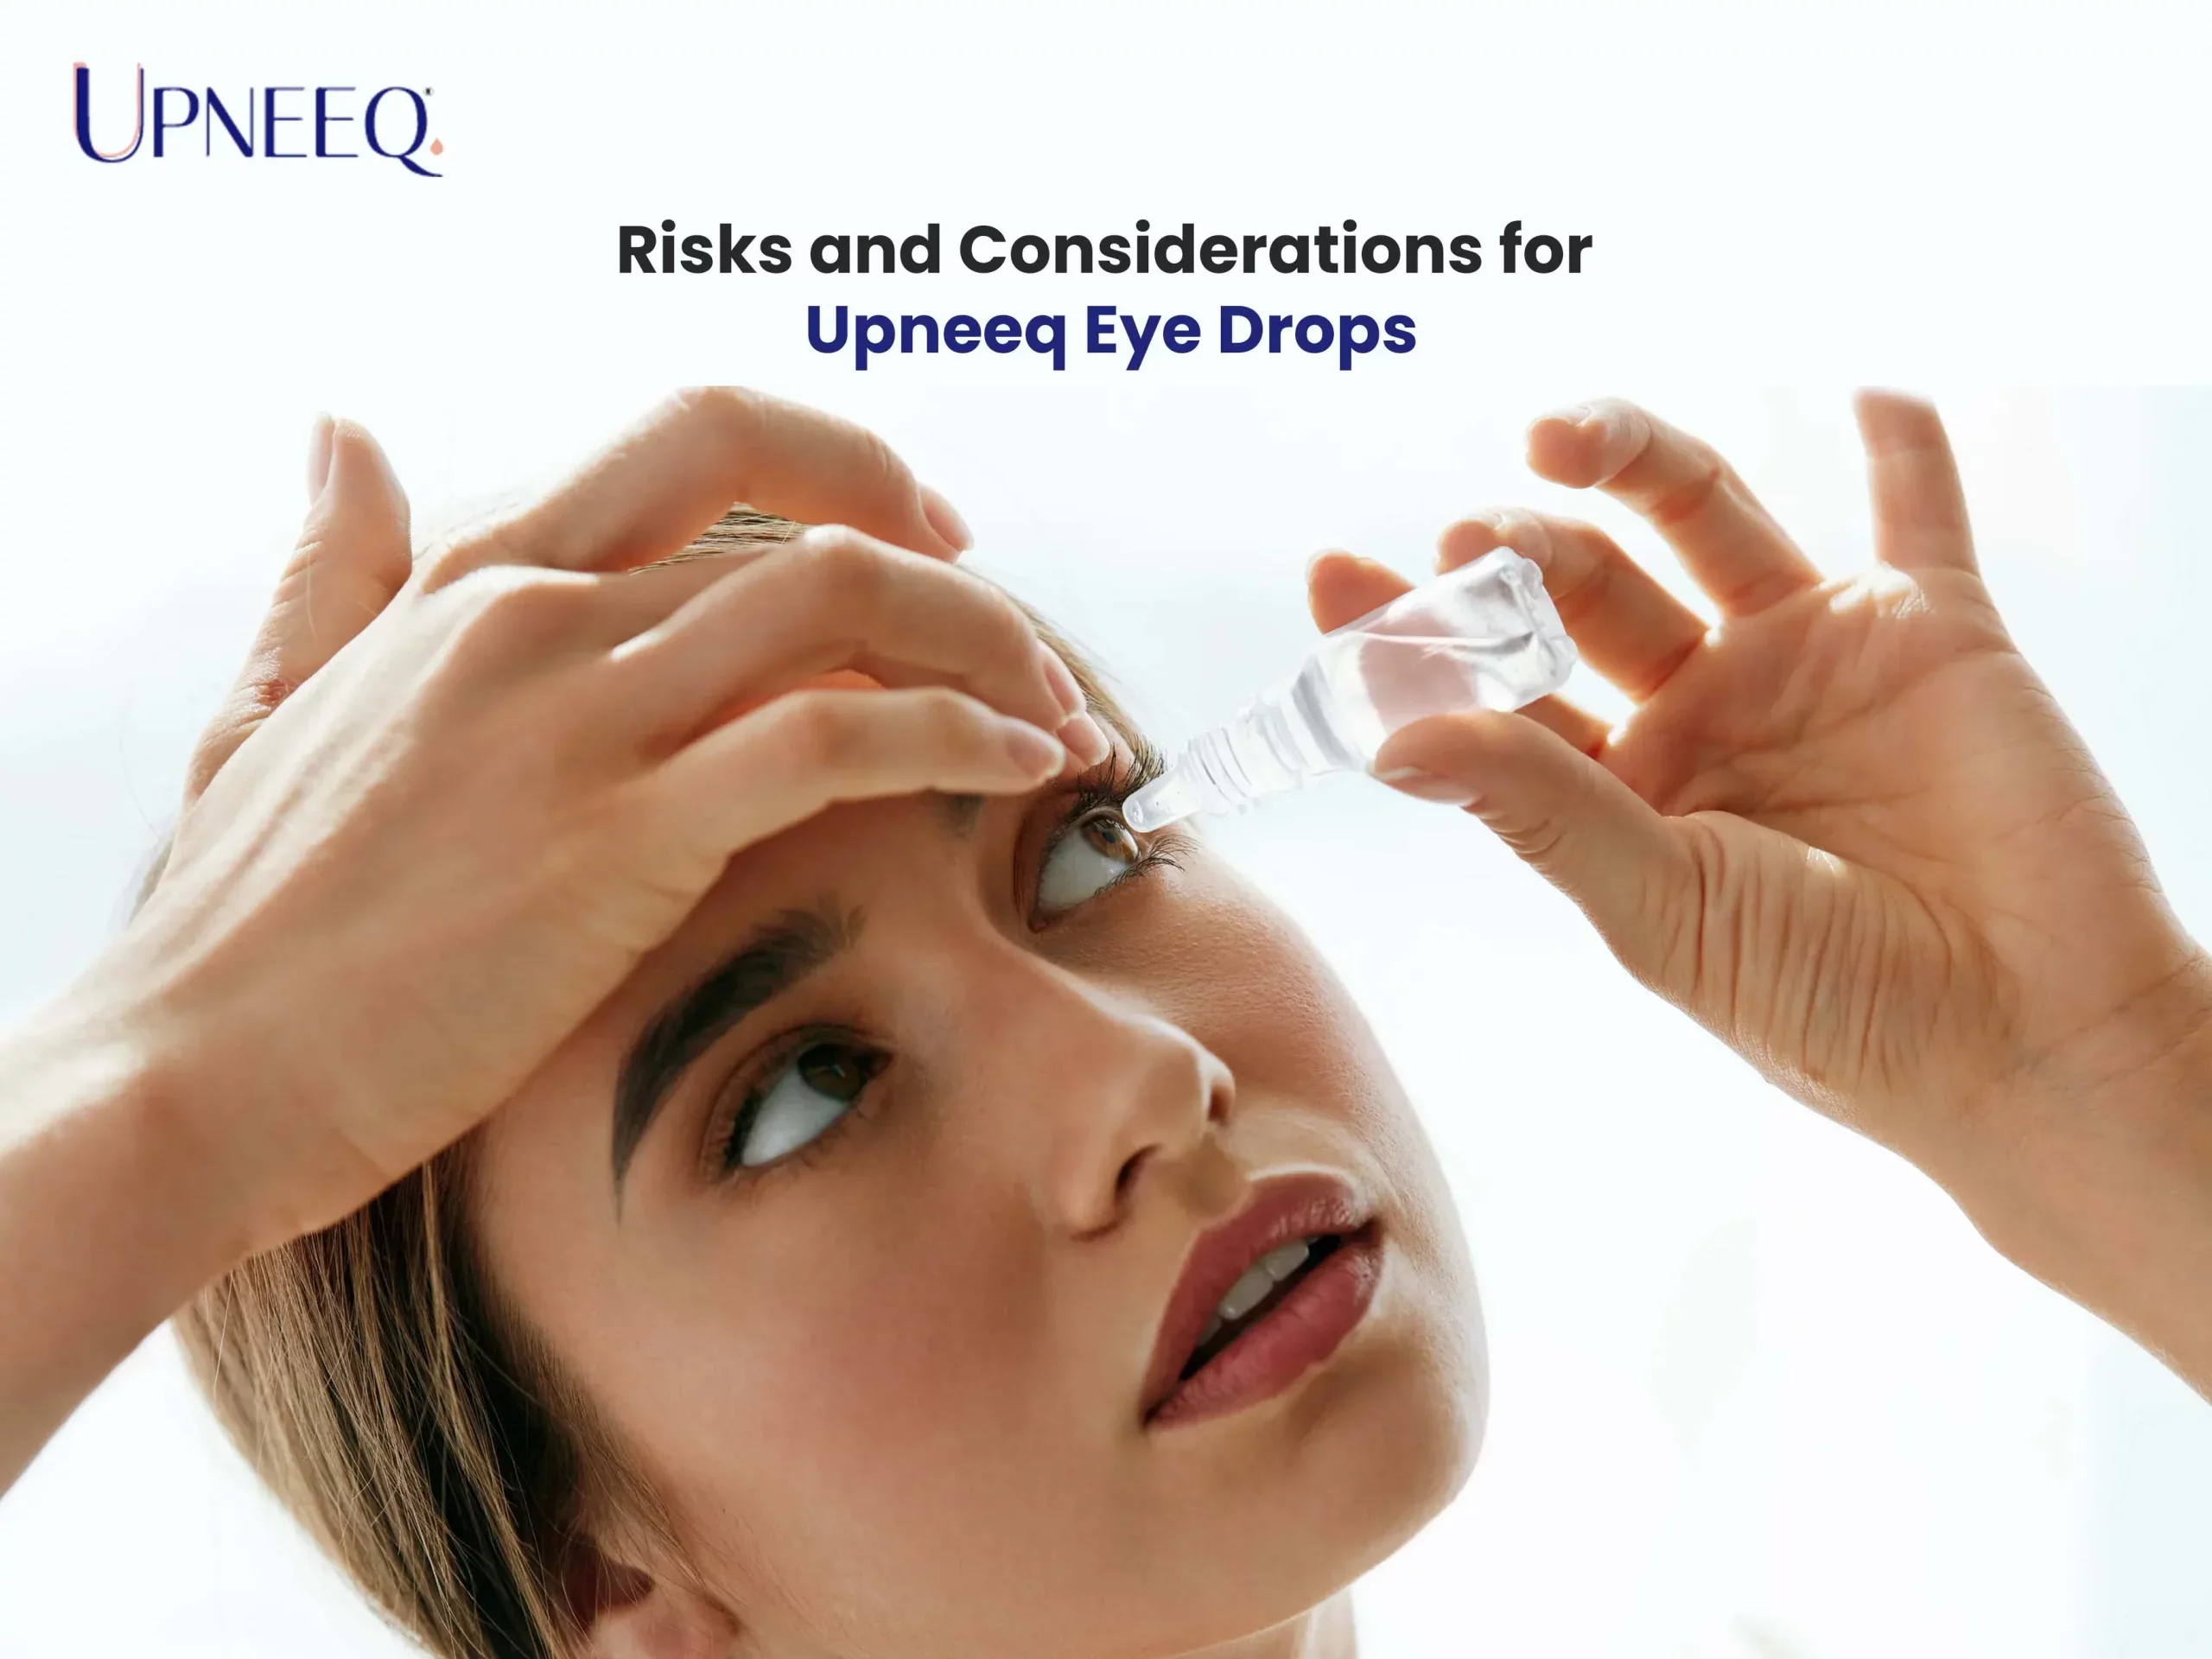 Risks and Considerations for Upneeq Eye Drops